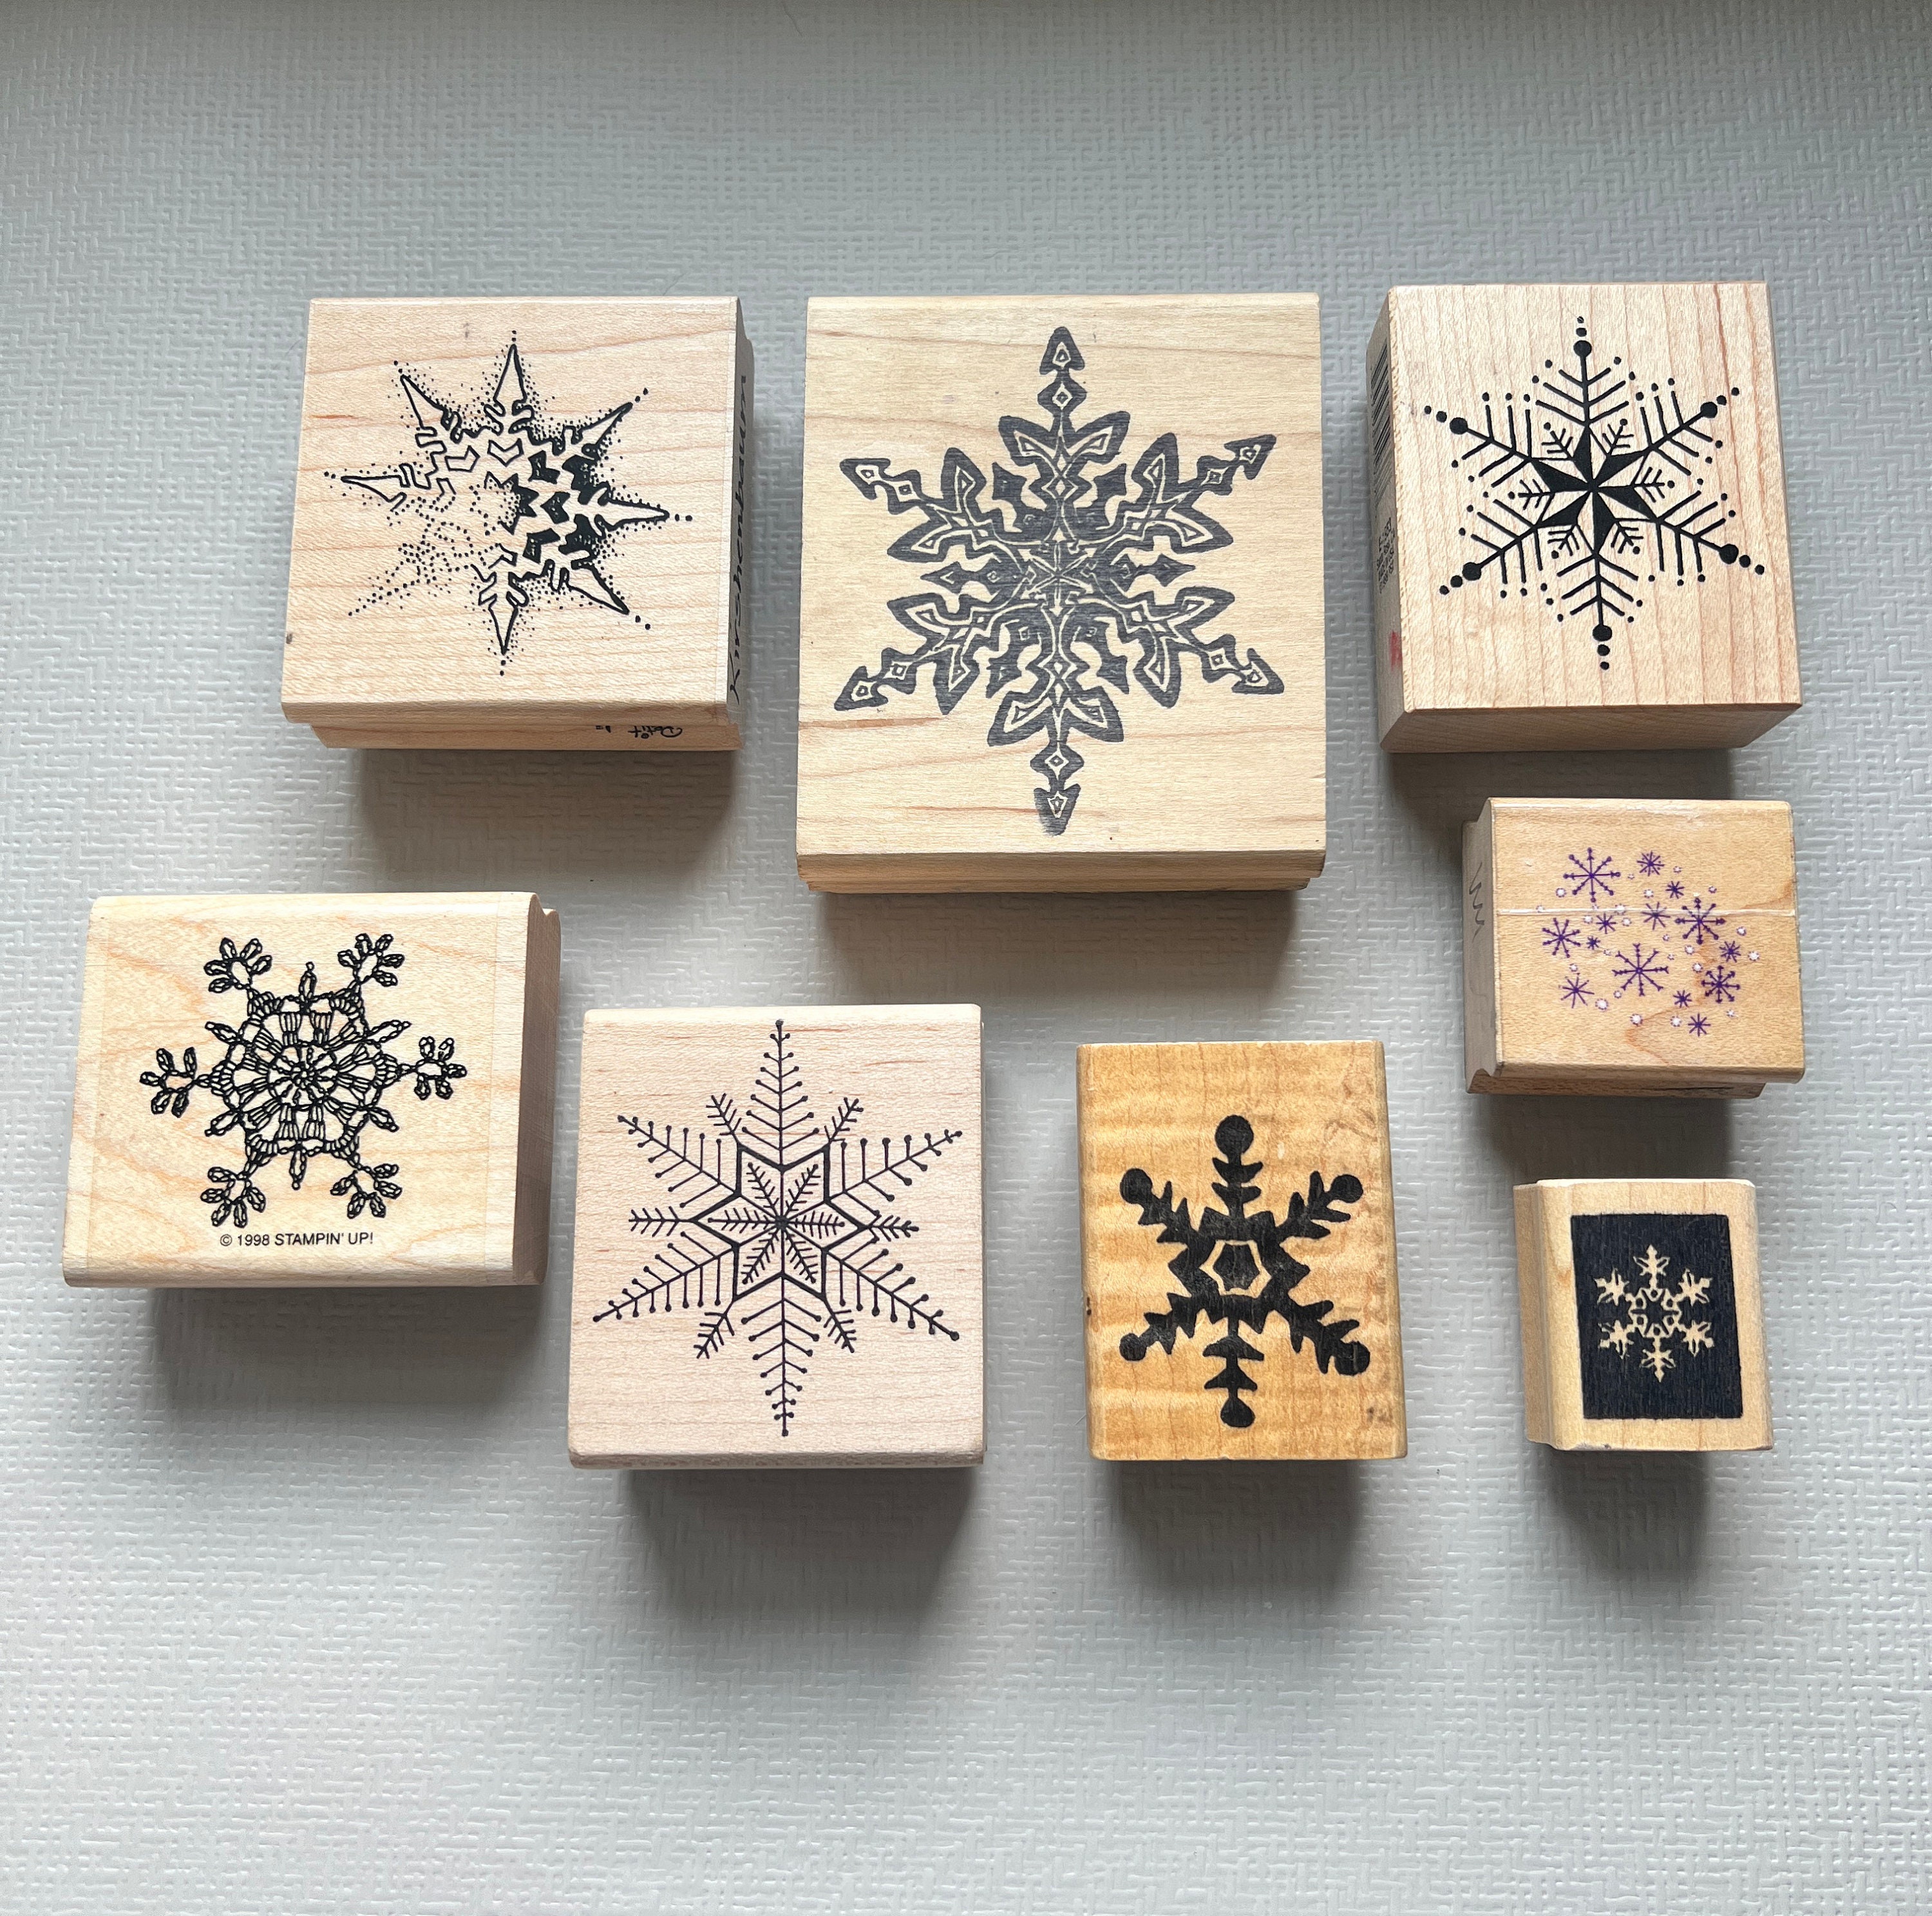 Tiny Snowflake Rubber Stamp SET 16mm Buy 4, 1 Free, Christmas Winter  Holiday Gift Tag Stamp Handmade by Blossom Stamps 